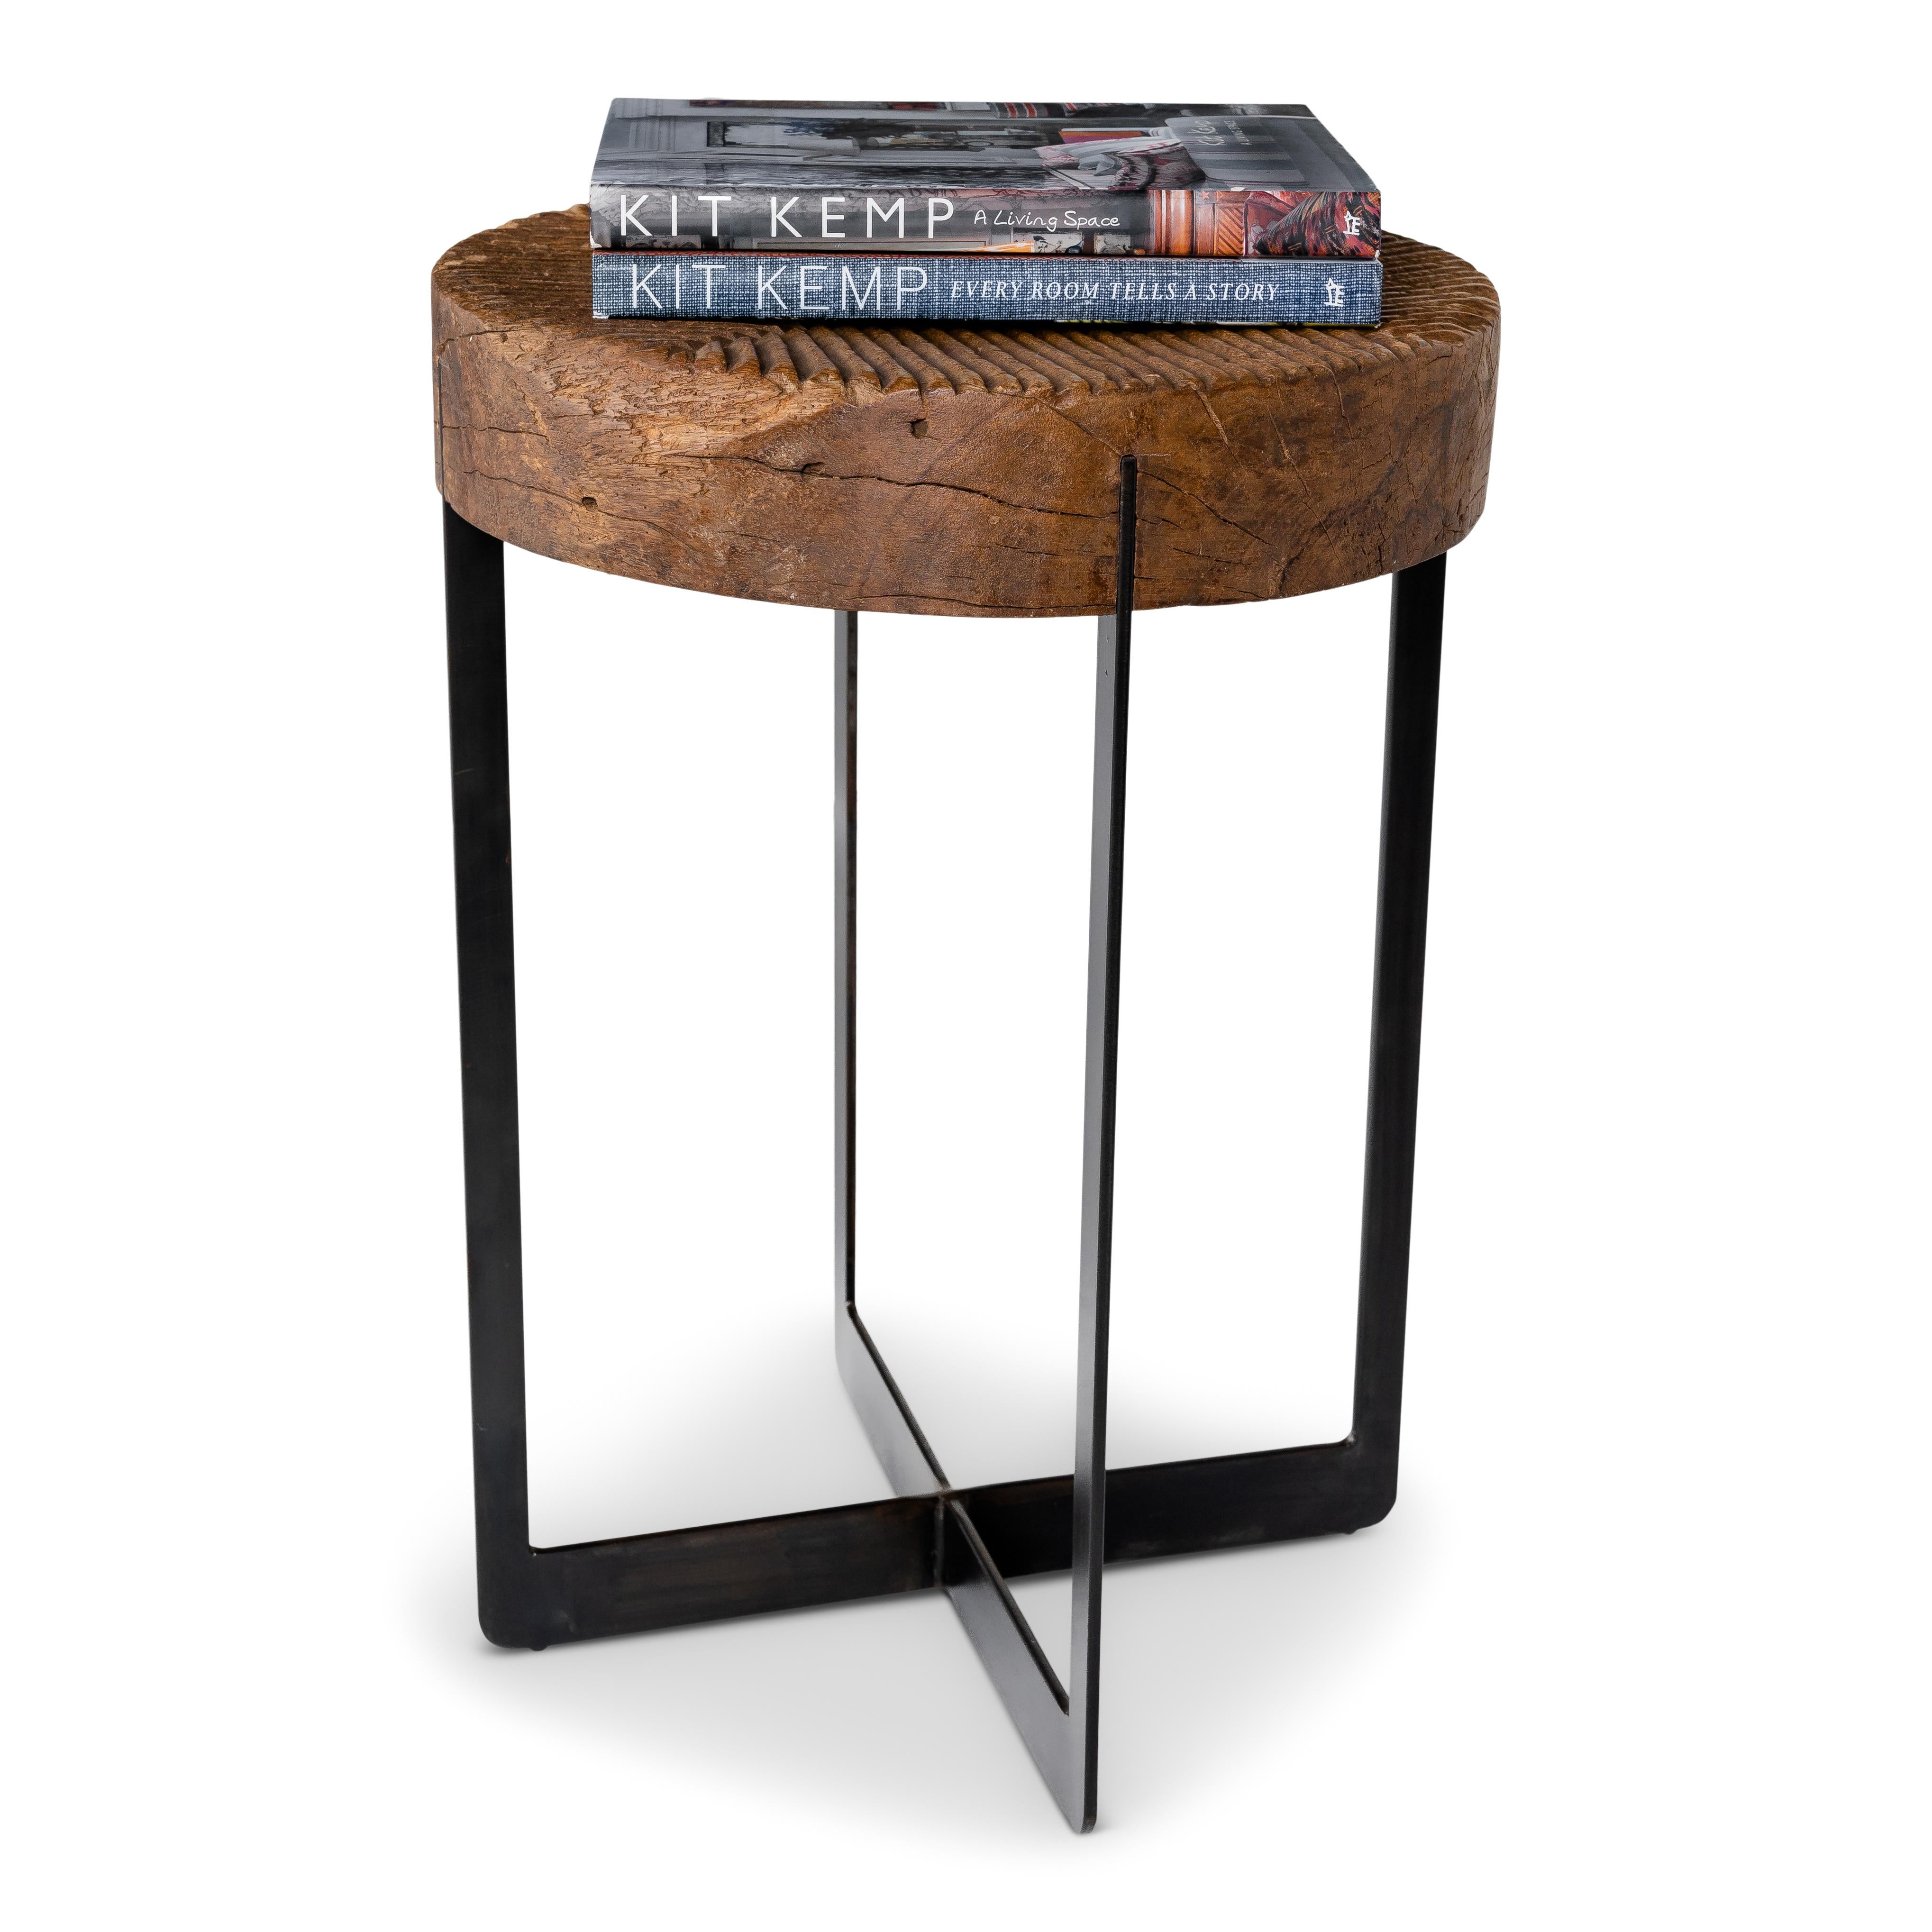 Bailhese wooden mill wheel on ebony patina steel base offers great texture, coloring, and a rustic Industrial feel. 

Piece from our one of a kind collection, Le Monde. Exclusive to Brendan Bass.

Globally curated by Brendan Bass, Le Monde